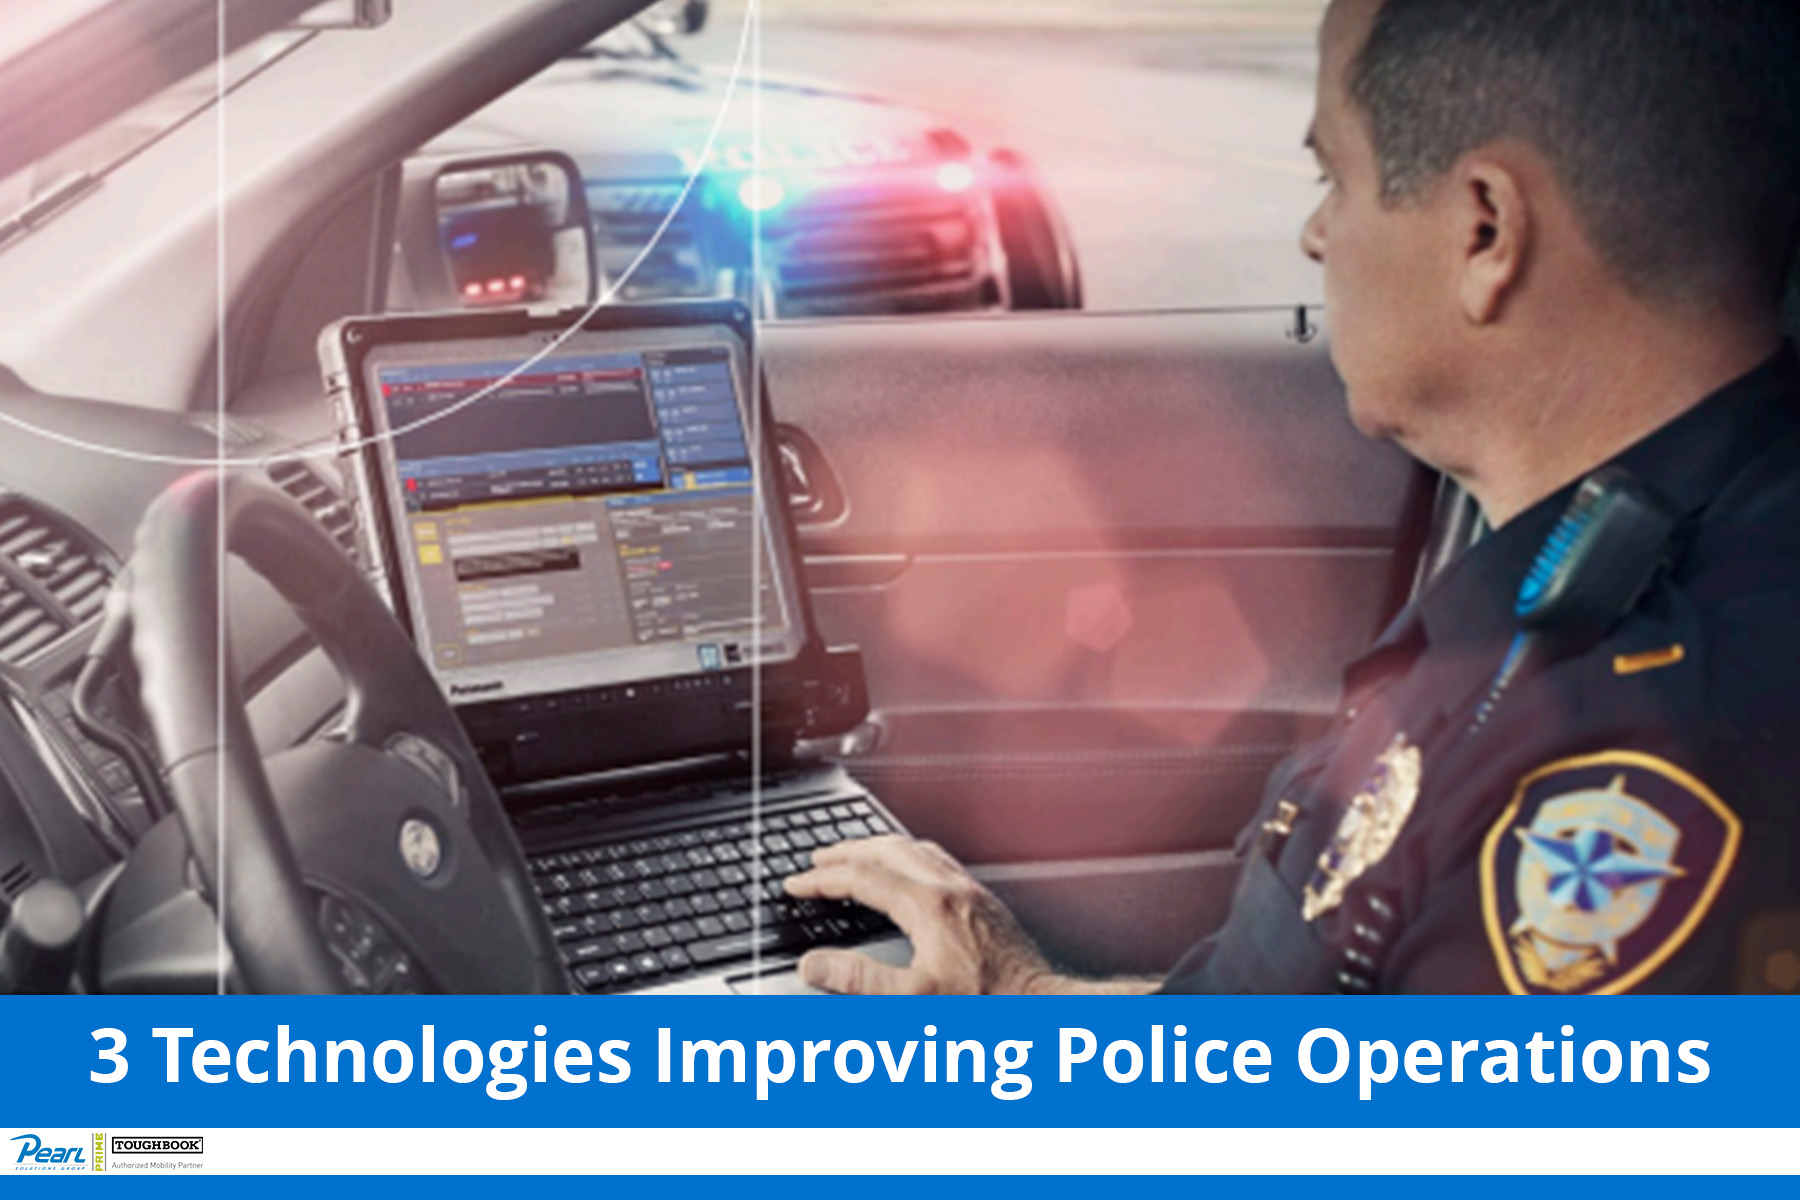 3 Technologies Improving Police Operations